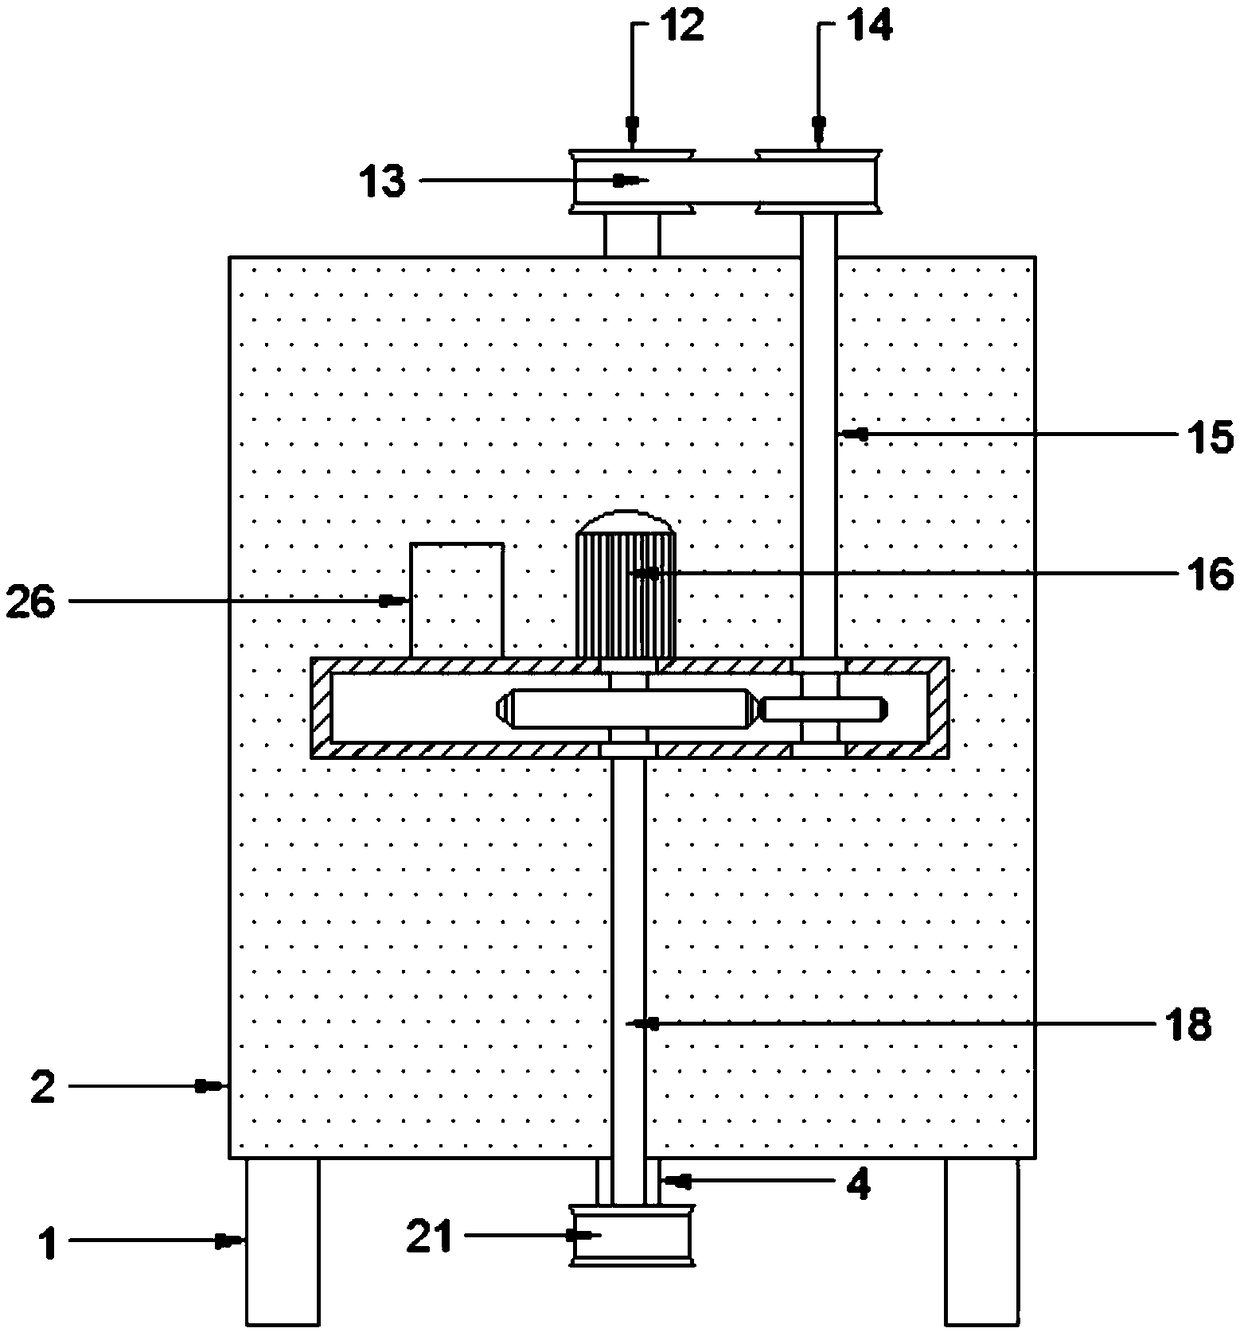 Bidirectional linkage grinding soaking device for waste paperboards